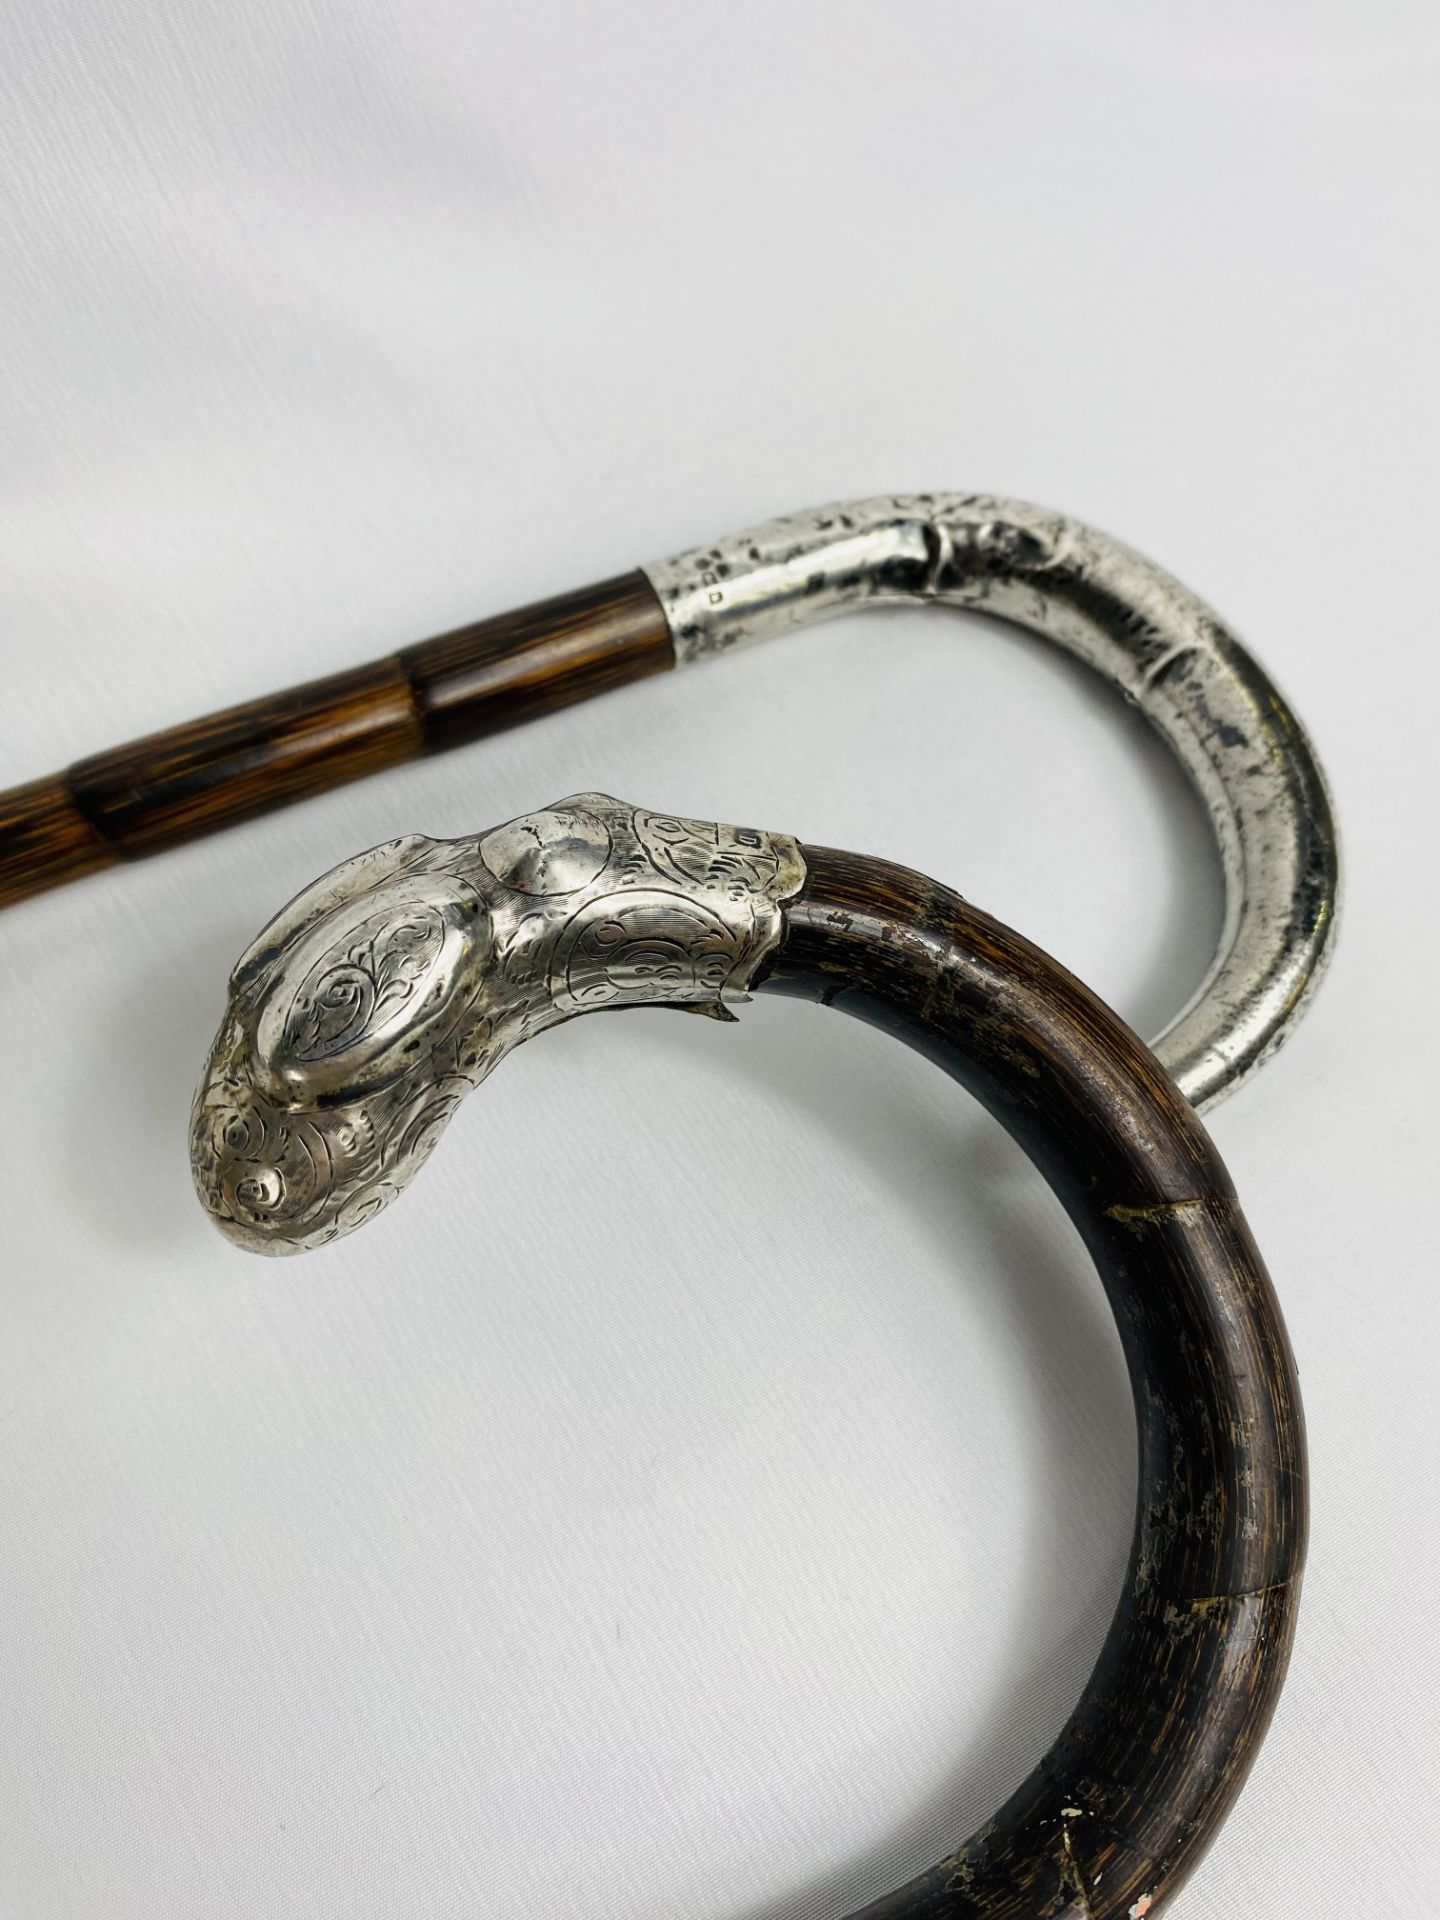 Walking cane with silver handle; walking cane with silver tip and ferrule - Image 4 of 4